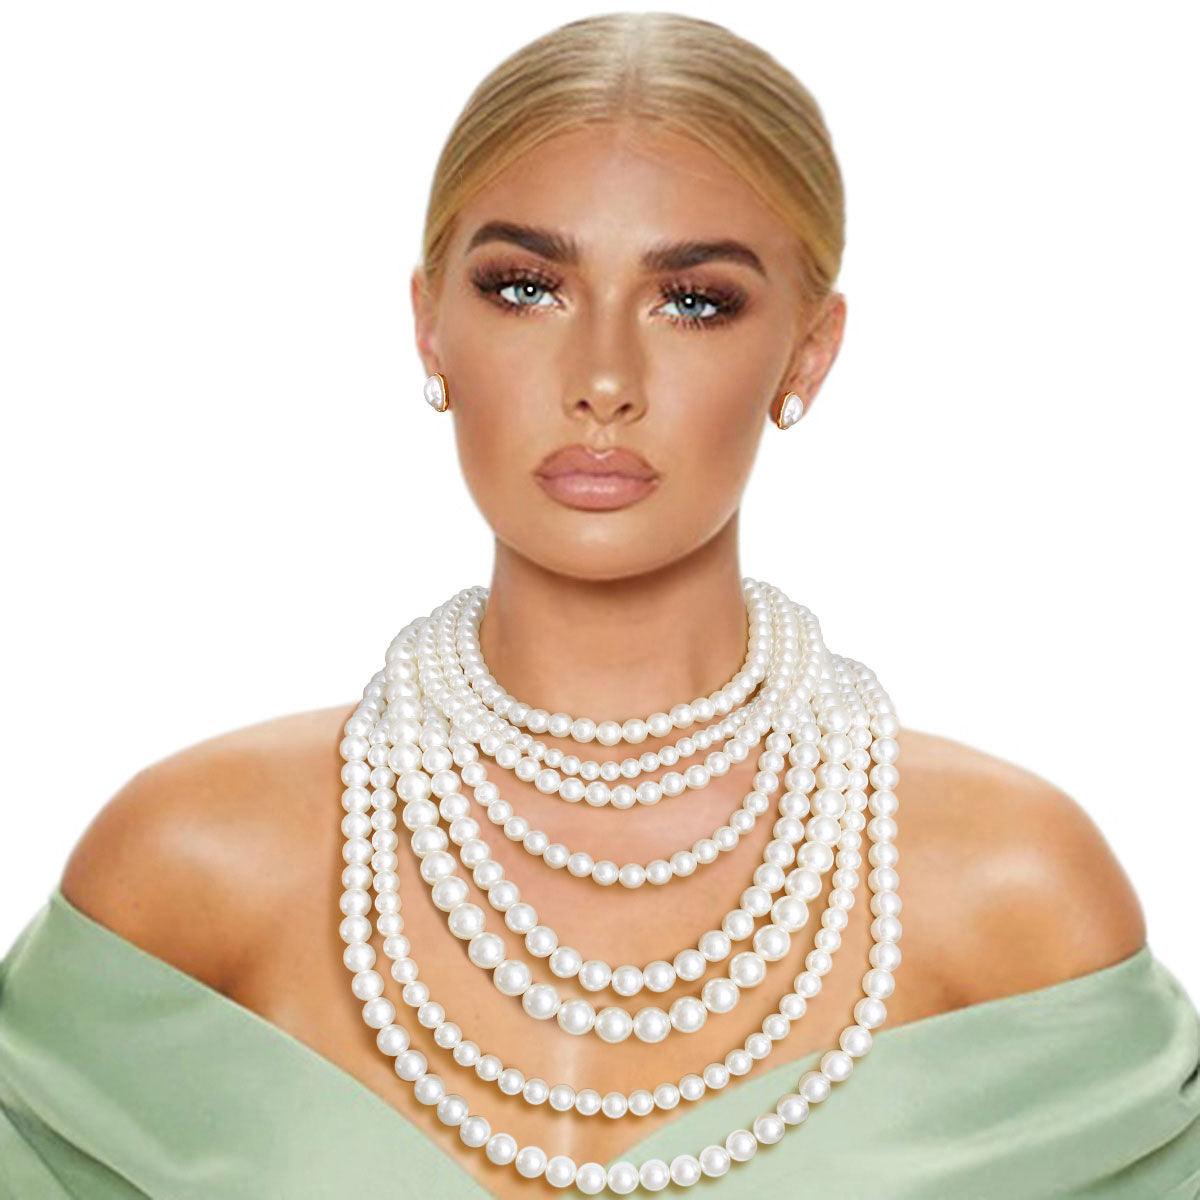 Fashion Jewelry: Multi-strand Pearl Necklace - A Timeless Statement Piece